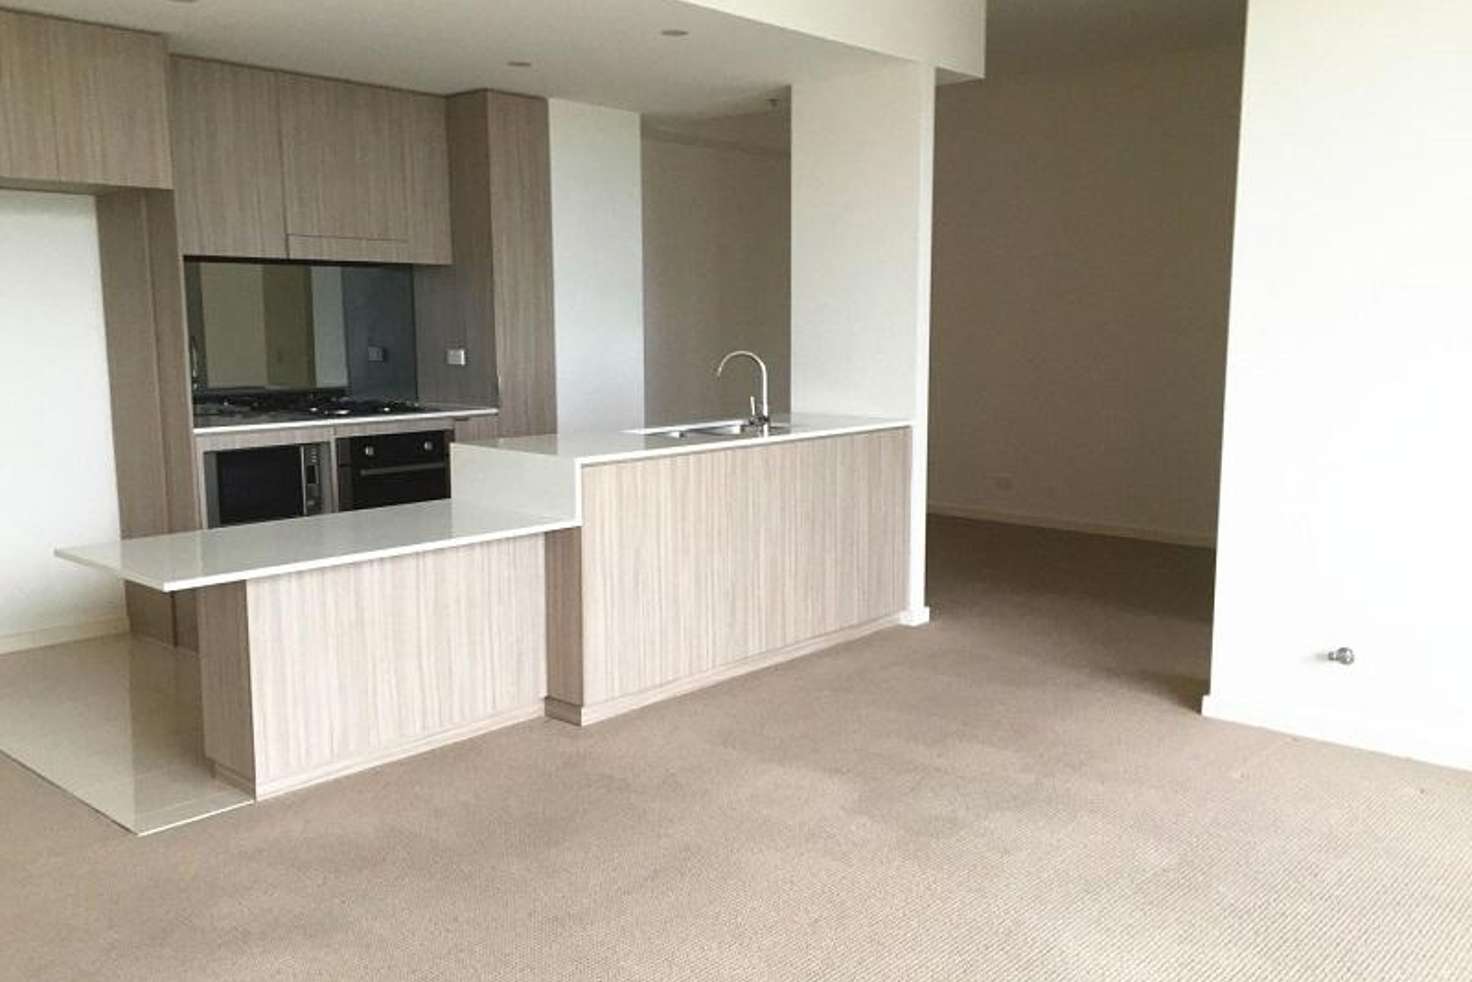 Main view of Homely apartment listing, 511/7 Washington Avenue, Riverwood NSW 2210